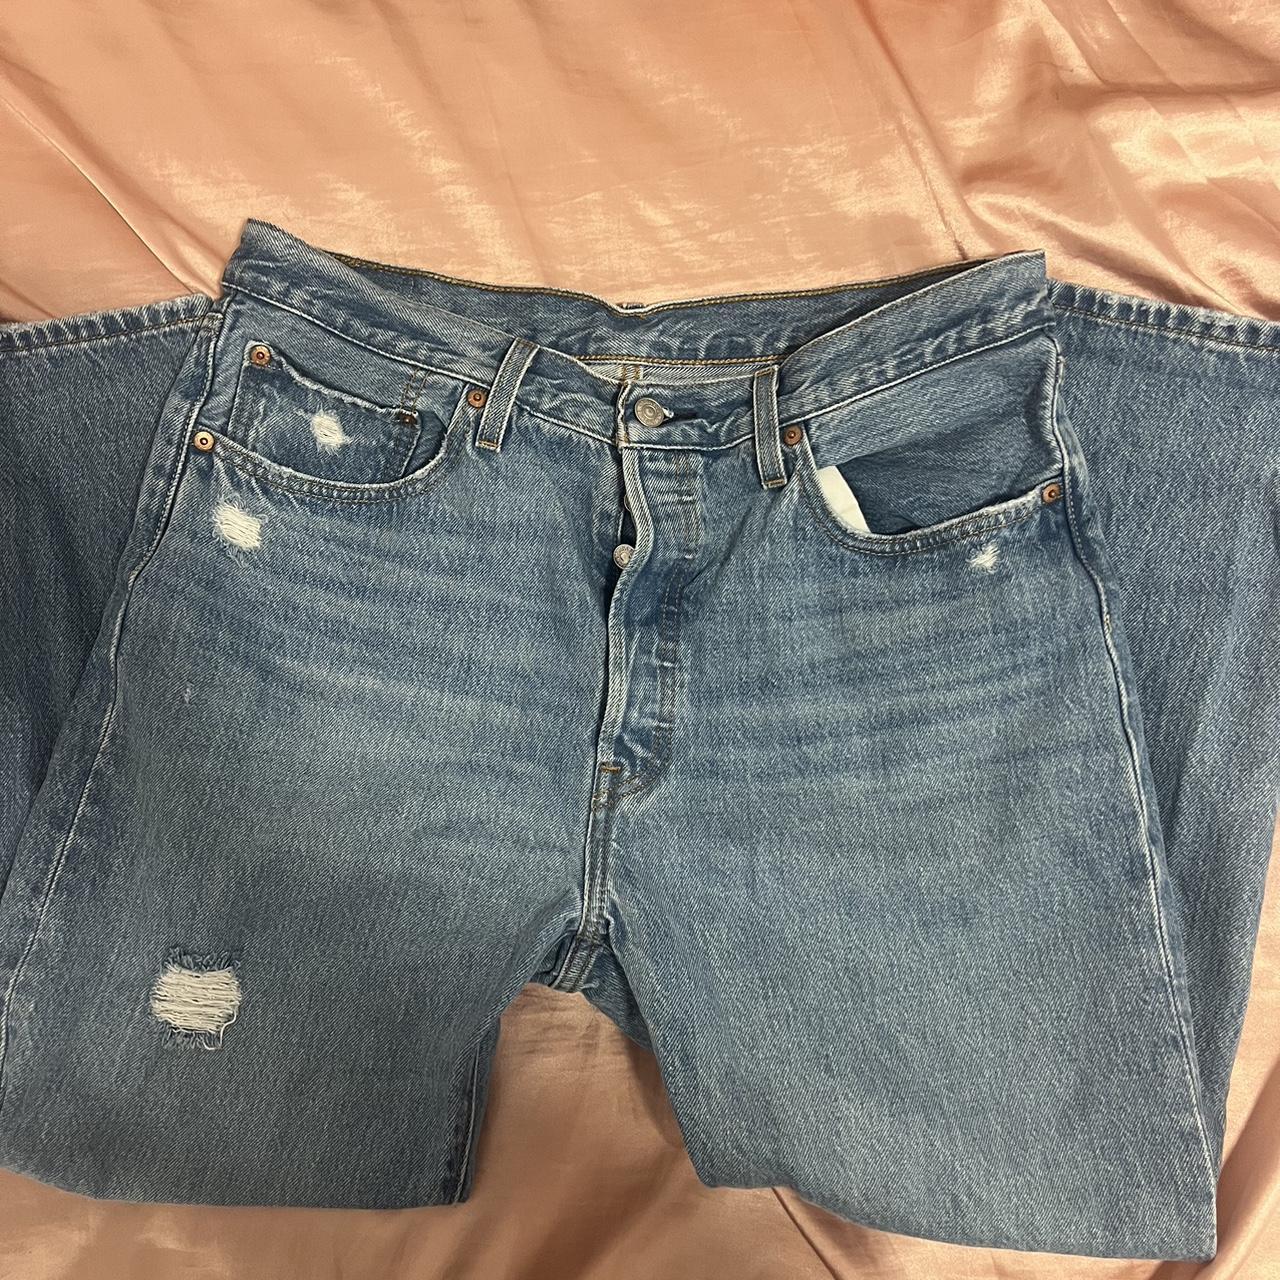 Brand new without tags Levi 501 jeans! Have light... - Depop